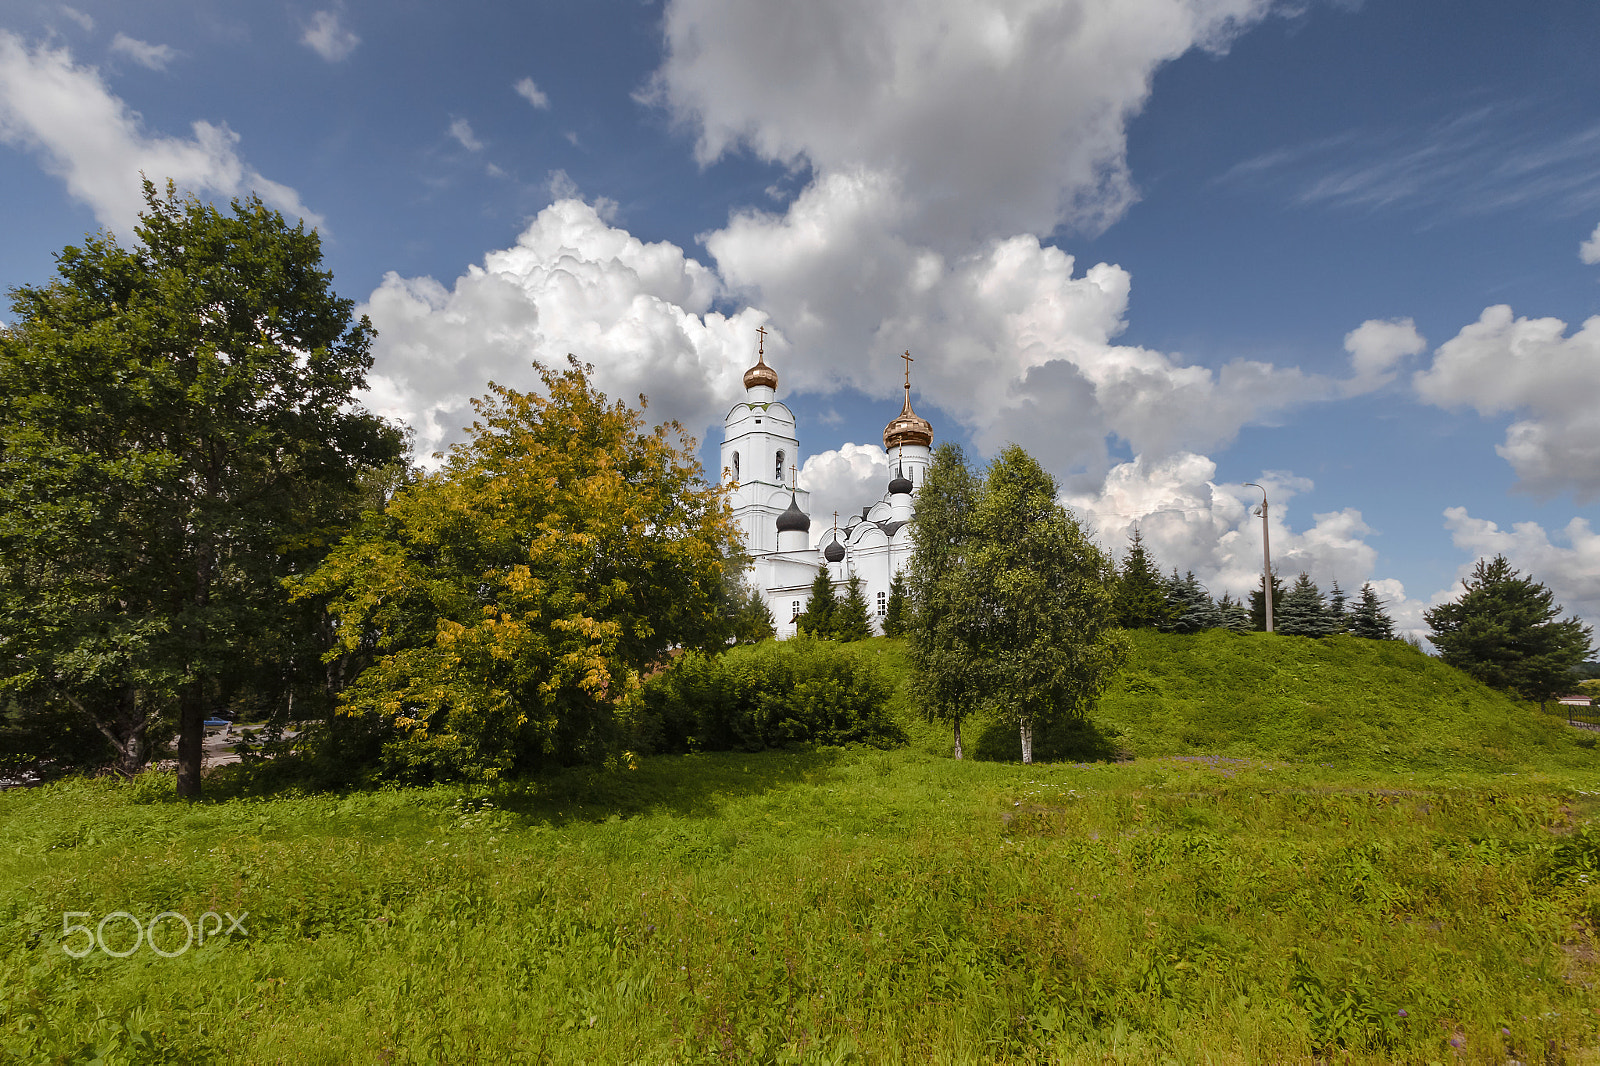 Nikon D7000 + Tamron SP AF 10-24mm F3.5-4.5 Di II LD Aspherical (IF) sample photo. Old church in vyazma, russia photography